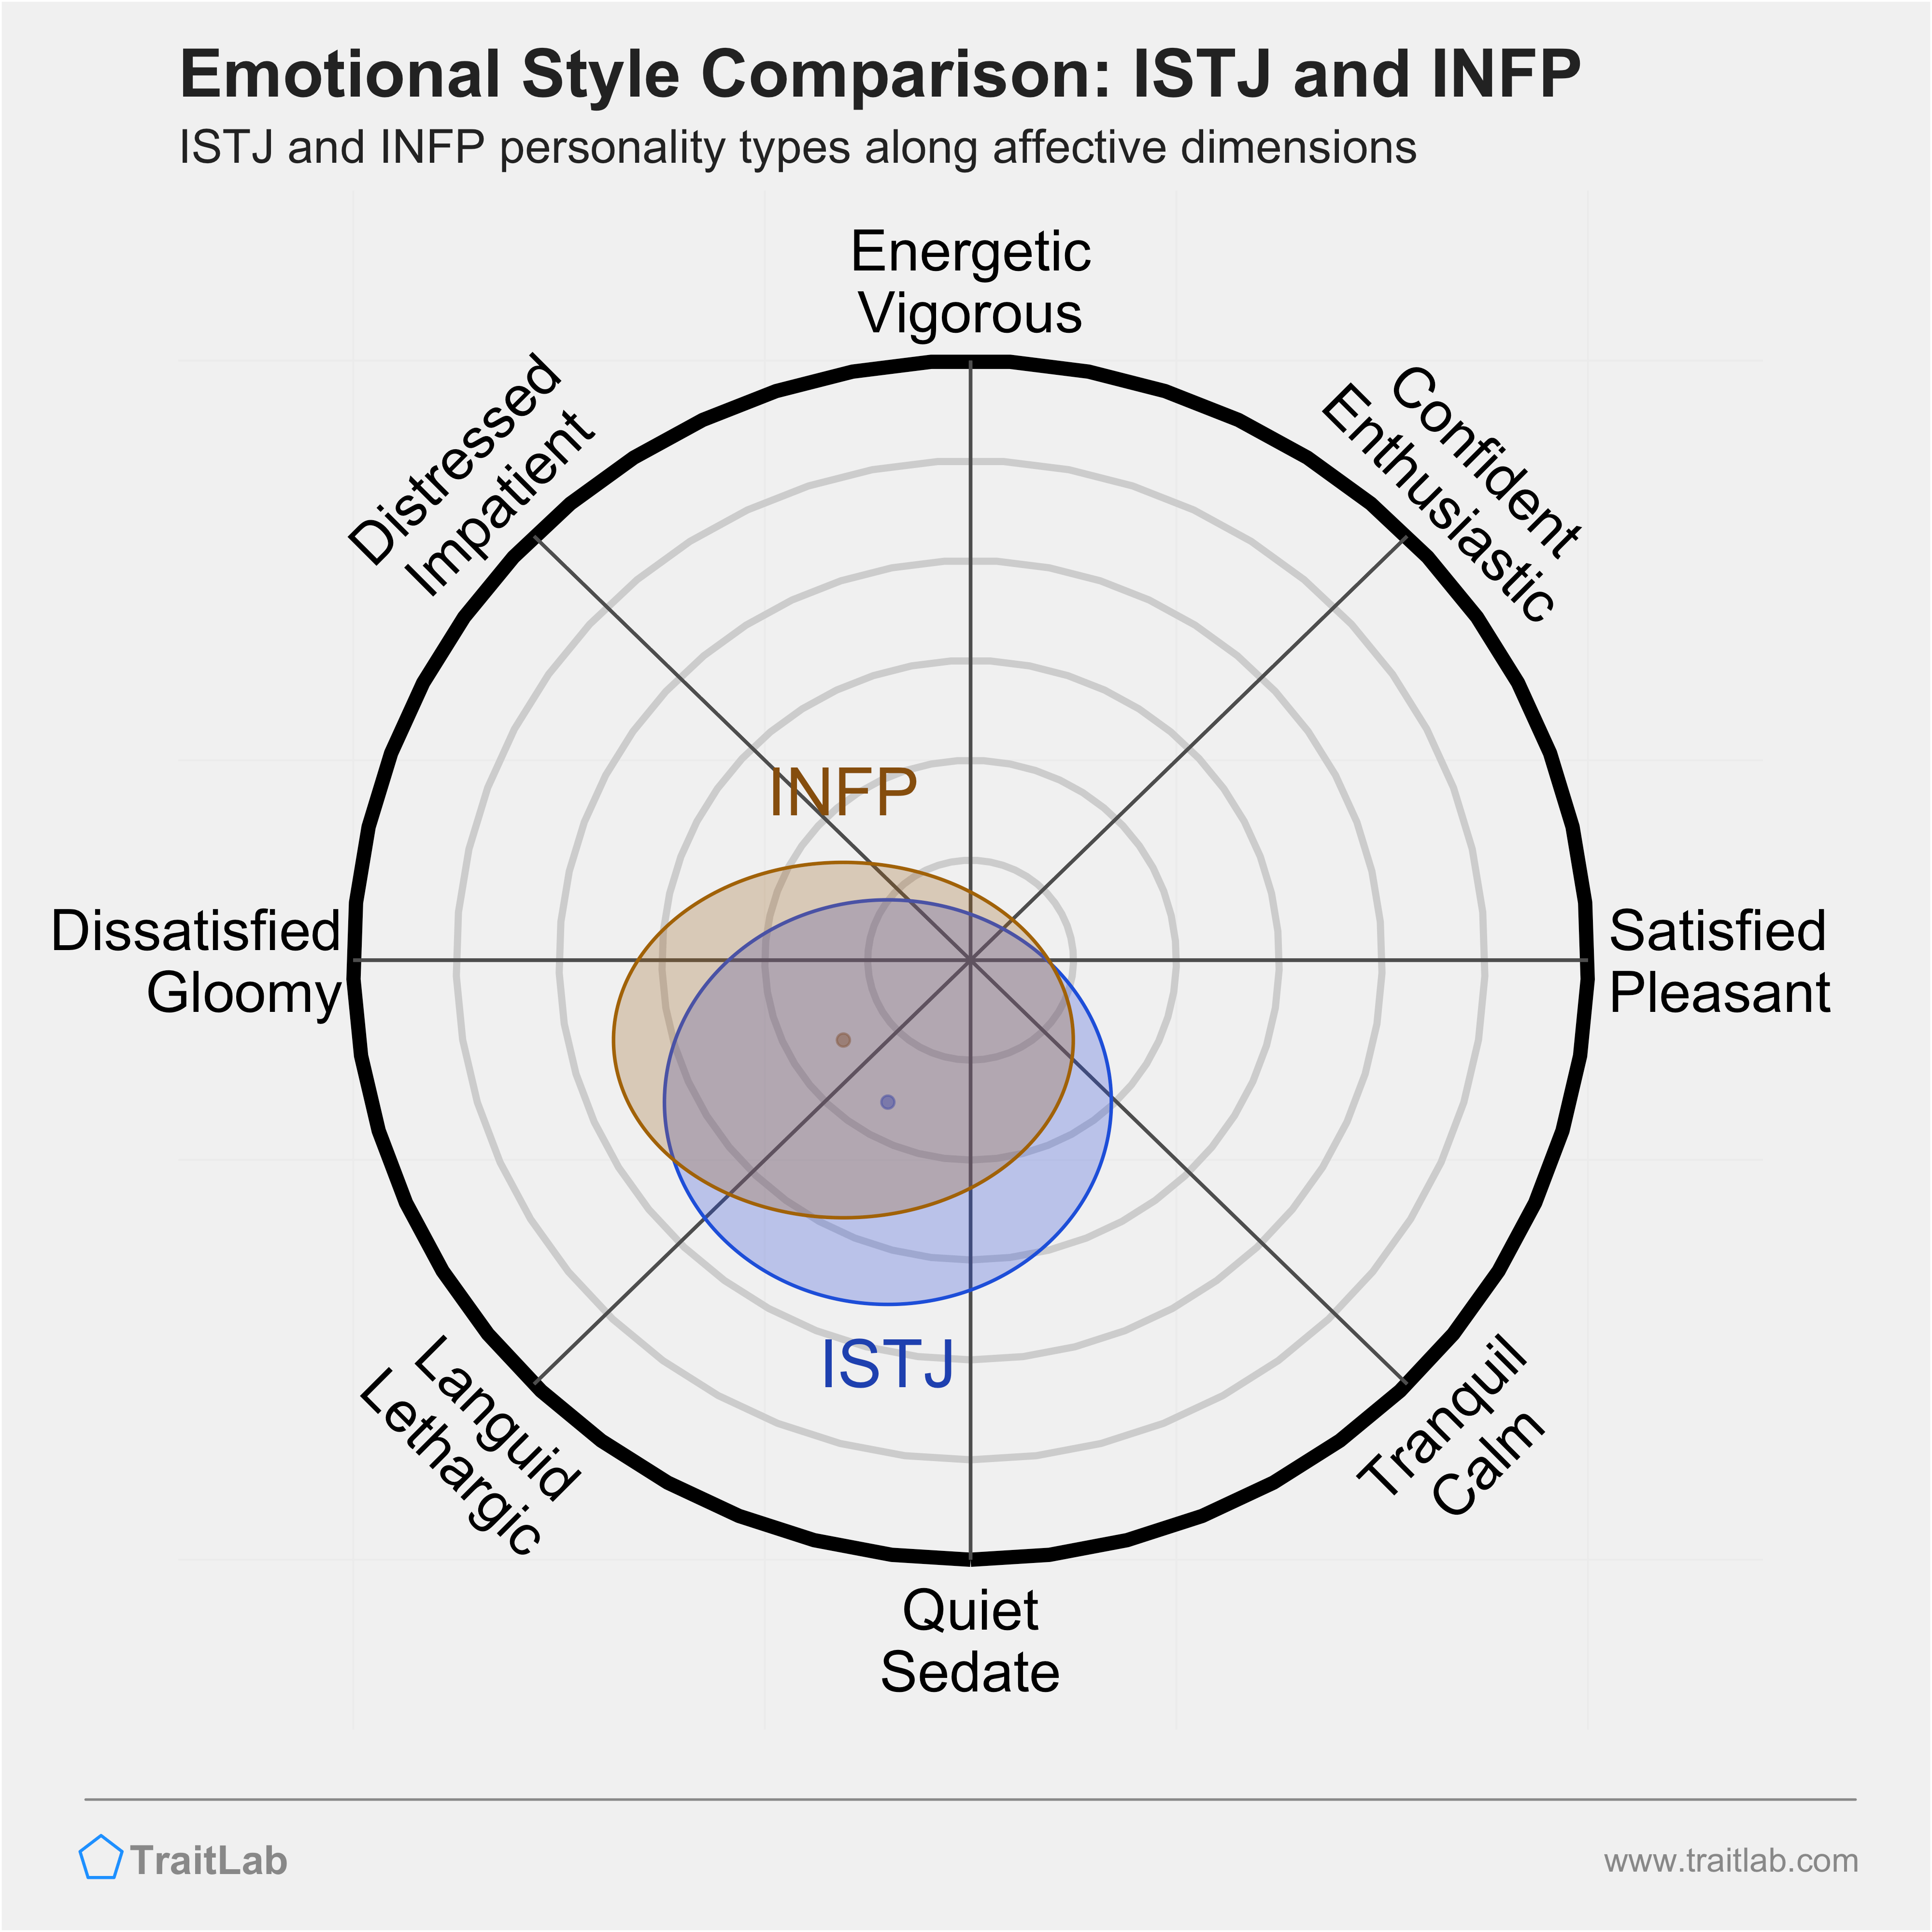 ISTJ and INFP comparison across emotional (affective) dimensions